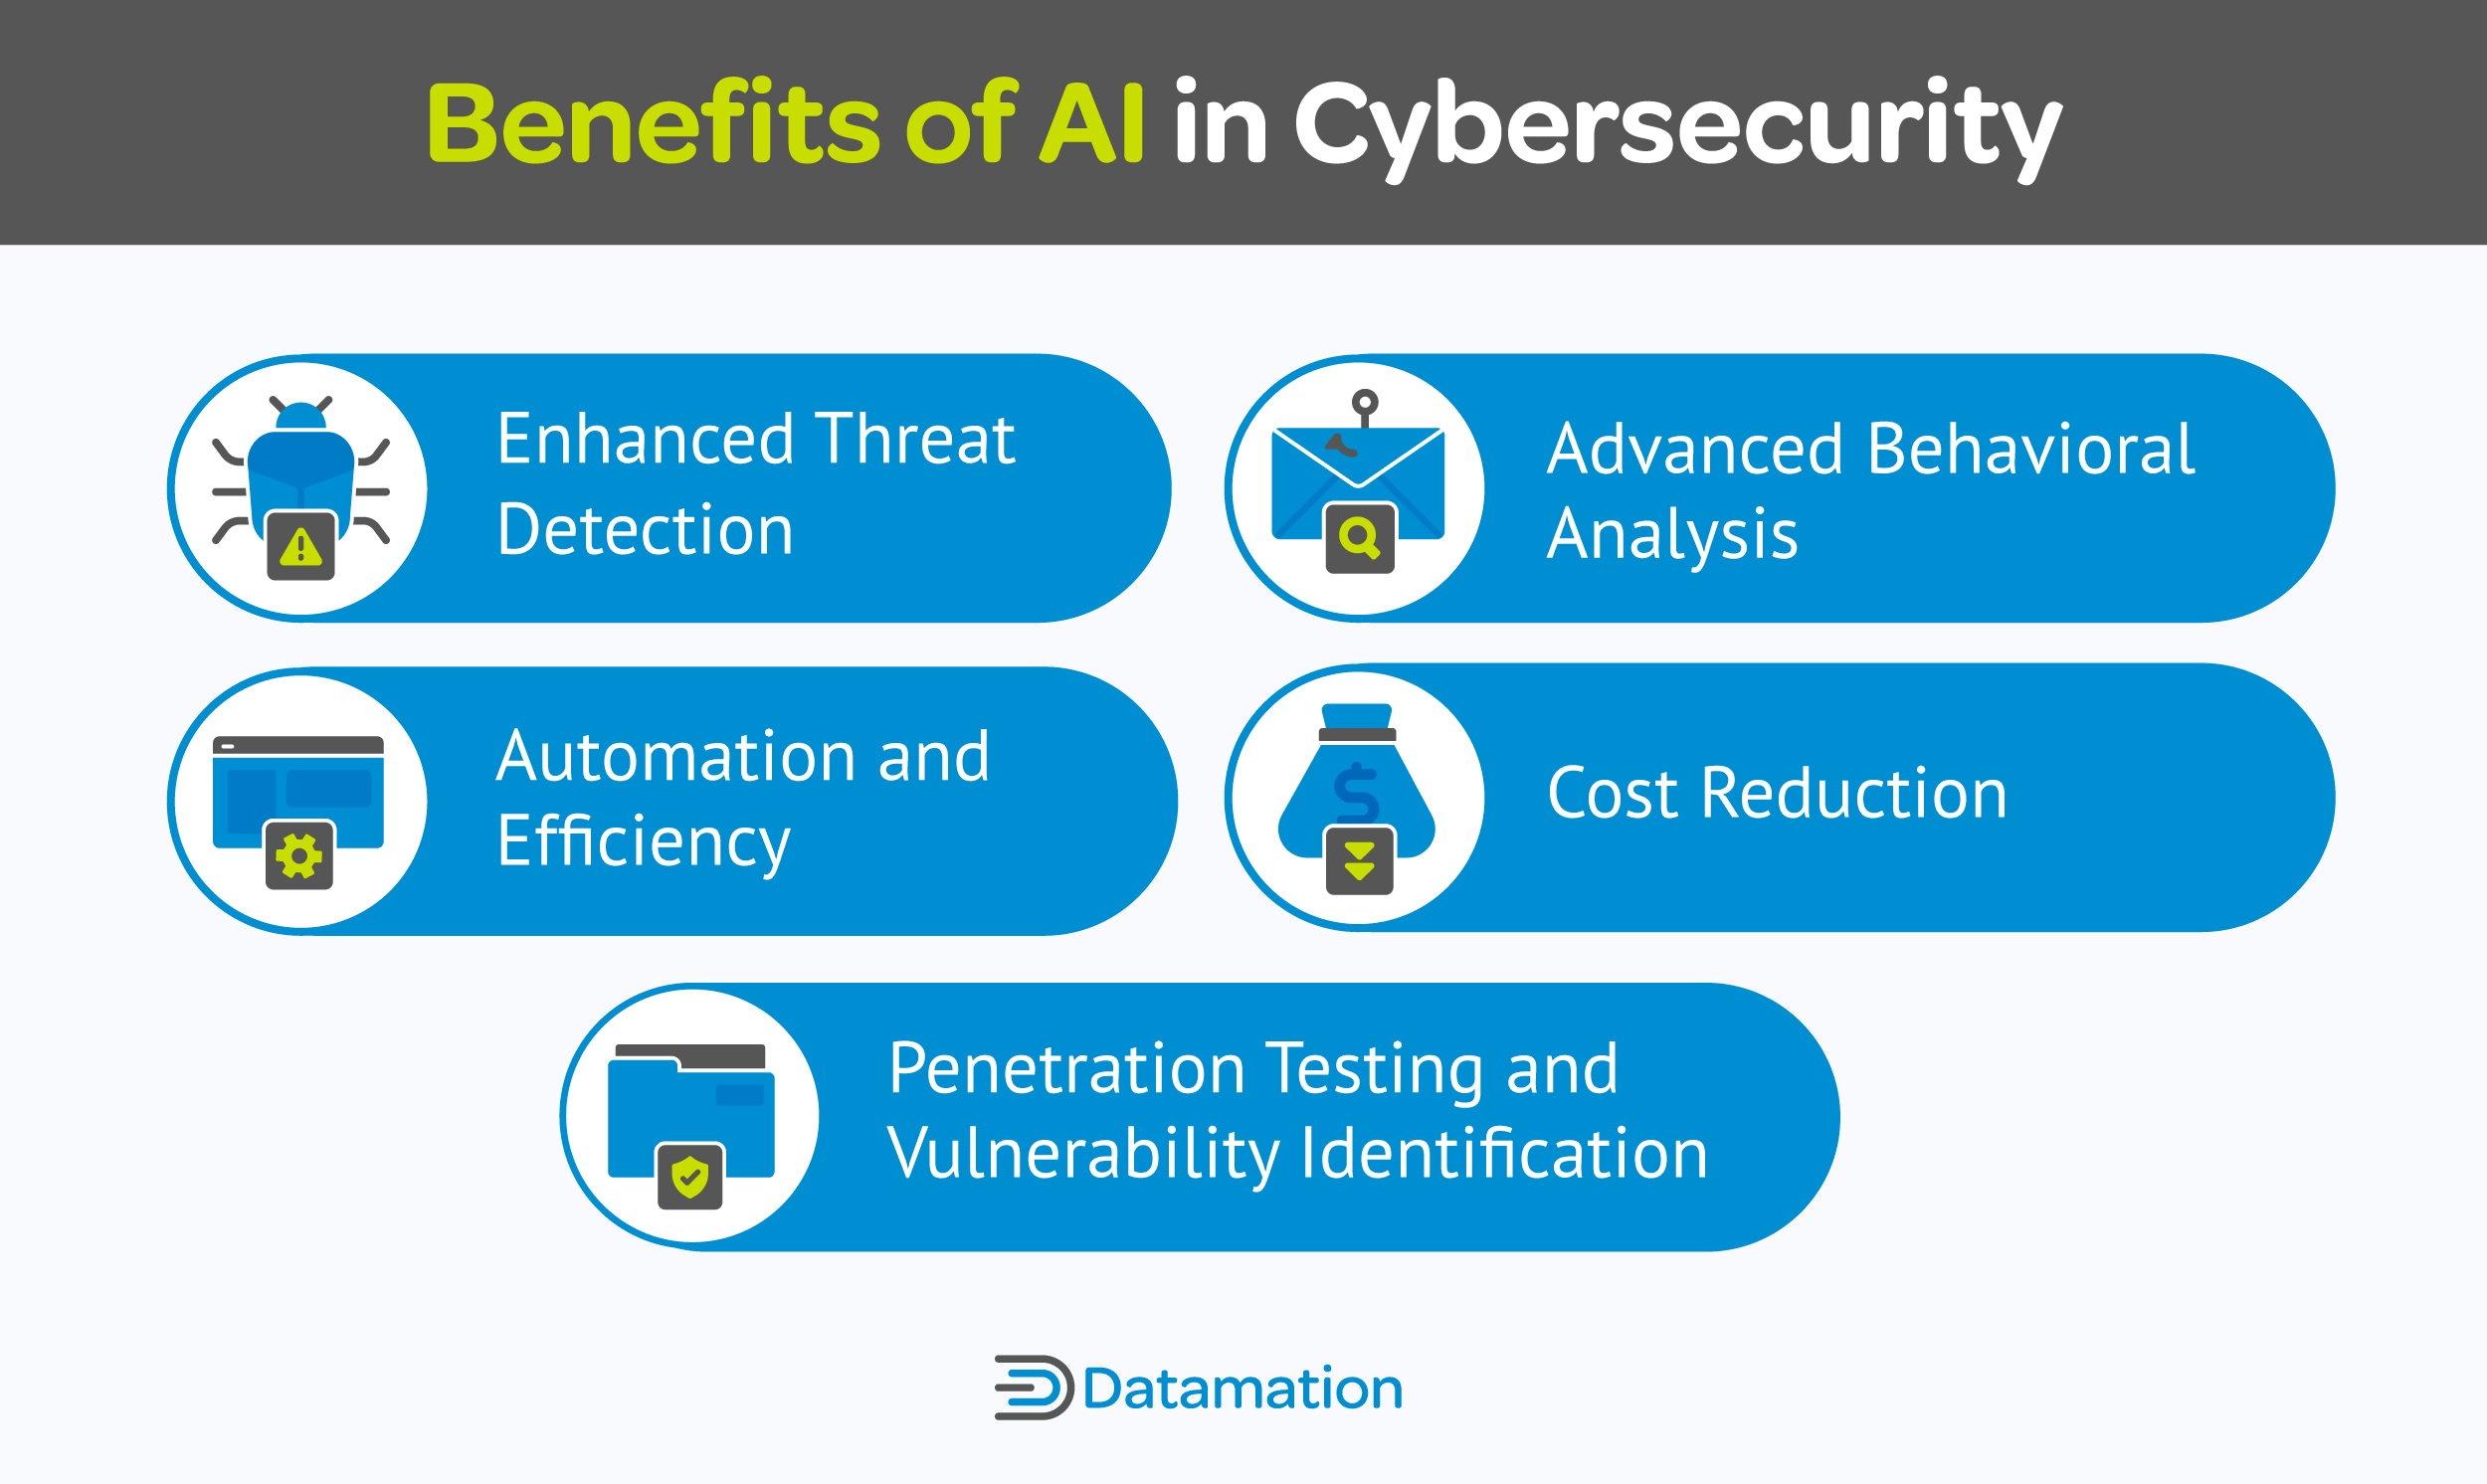 Benefits of AI in Cybersecurity